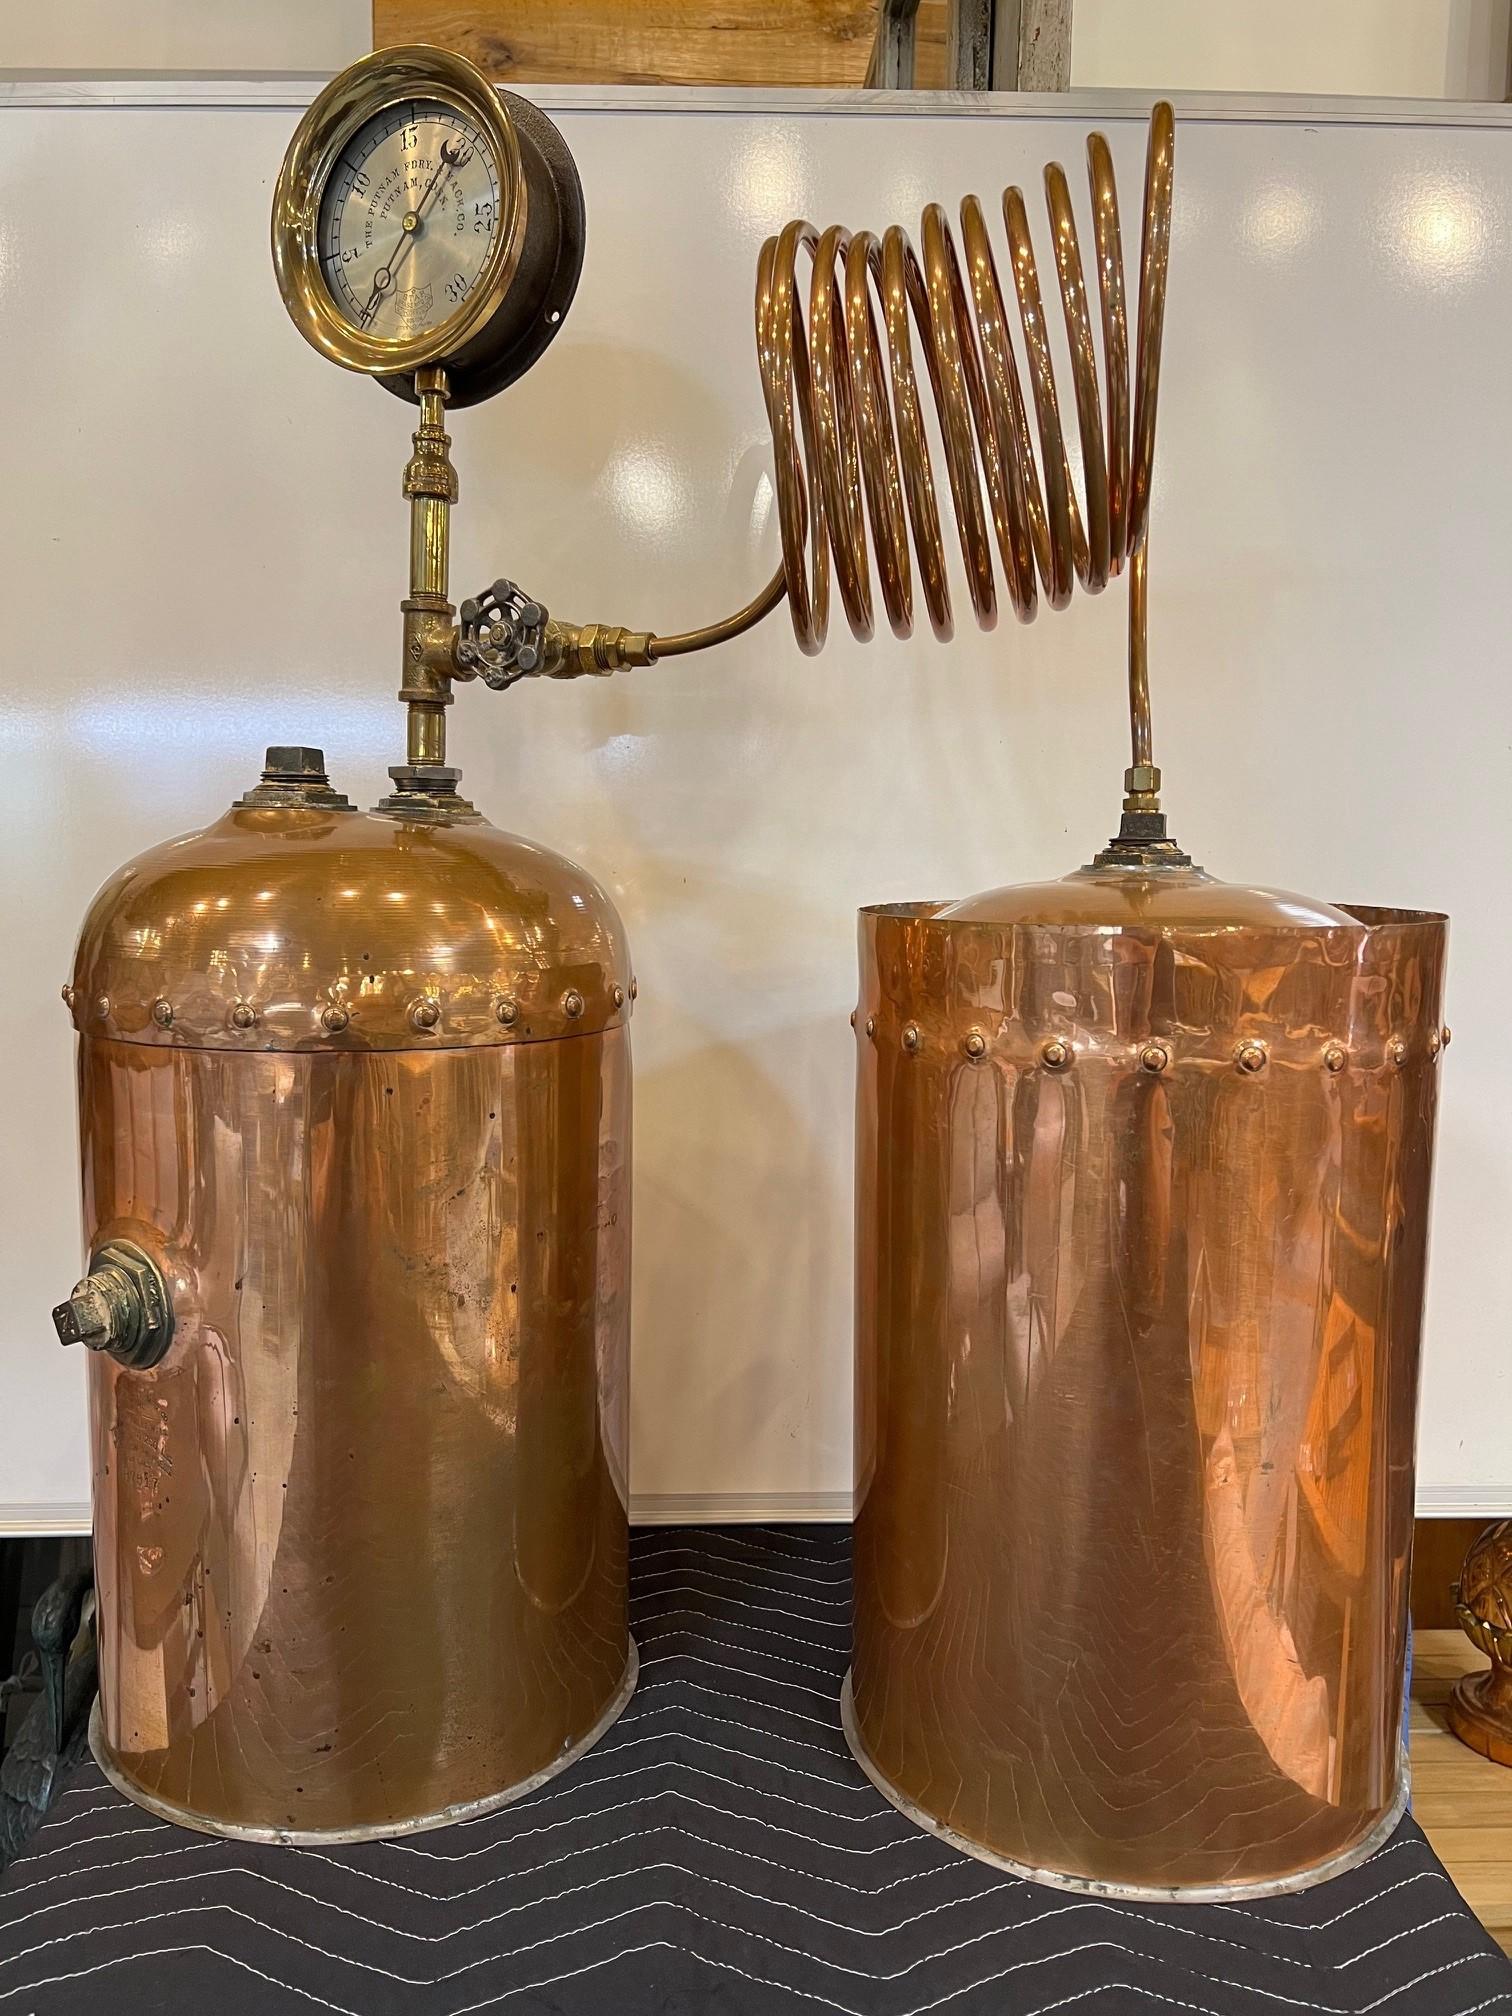 Antique copper moonshine or whiskey distillery is a 25 gallon signed by Dahlquest Manufacturing Company Somerville Mass and presser dial by The Putnam FDRY from Putnam CT. This is a fantastic piece perfect for the whiskey lover. Also a great display